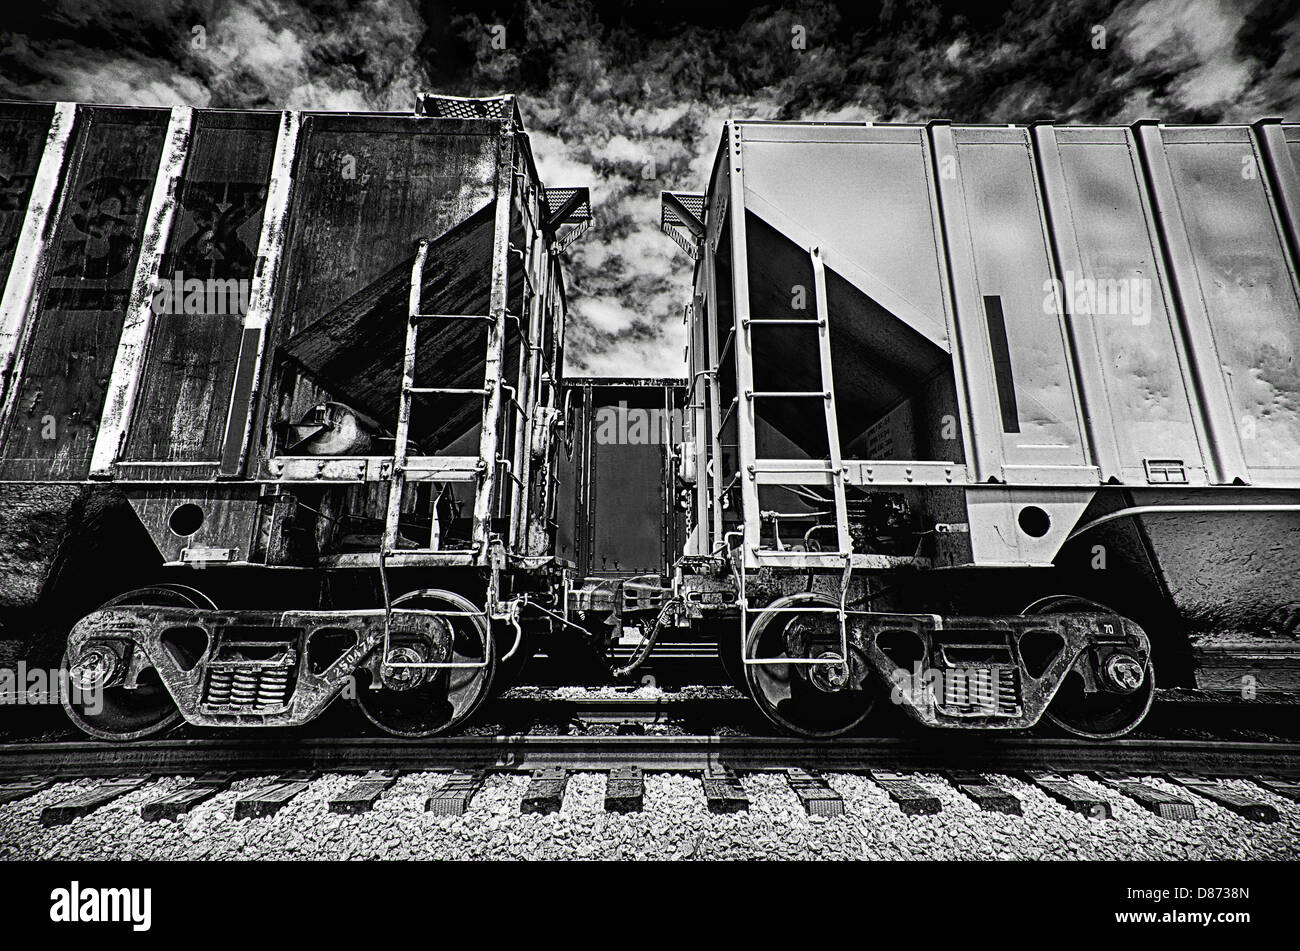 This is a black and white image of train cars coupling. Stock Photo